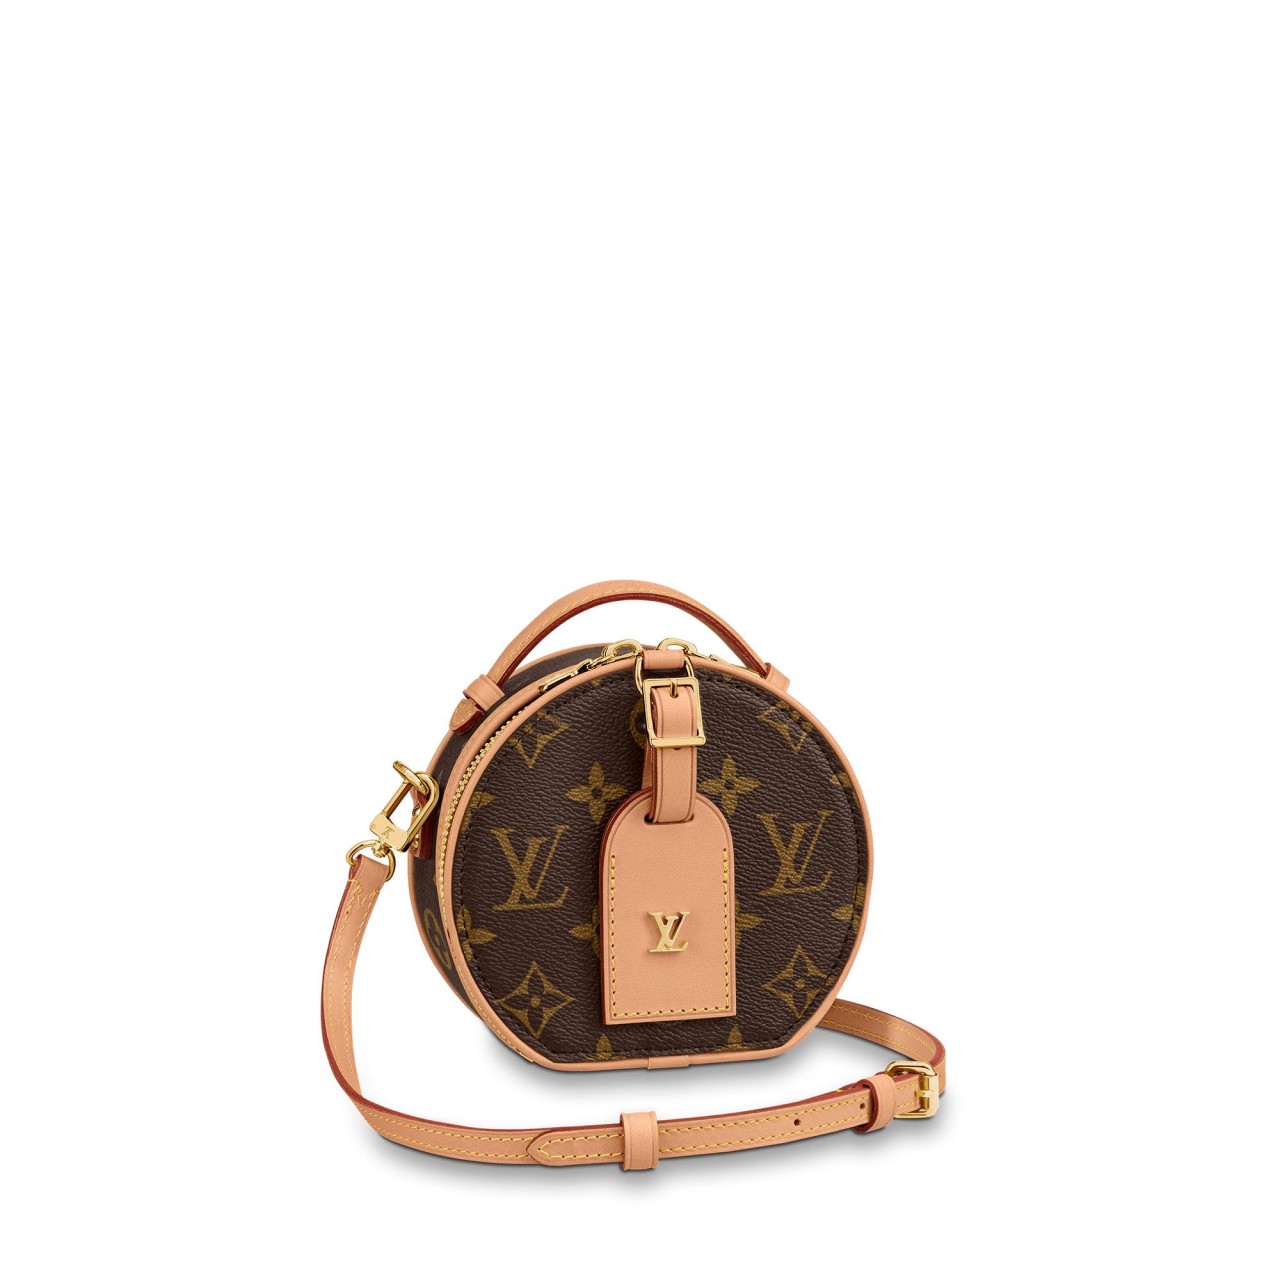 Do You Want a Piece of this Louis Vuitton Bag?